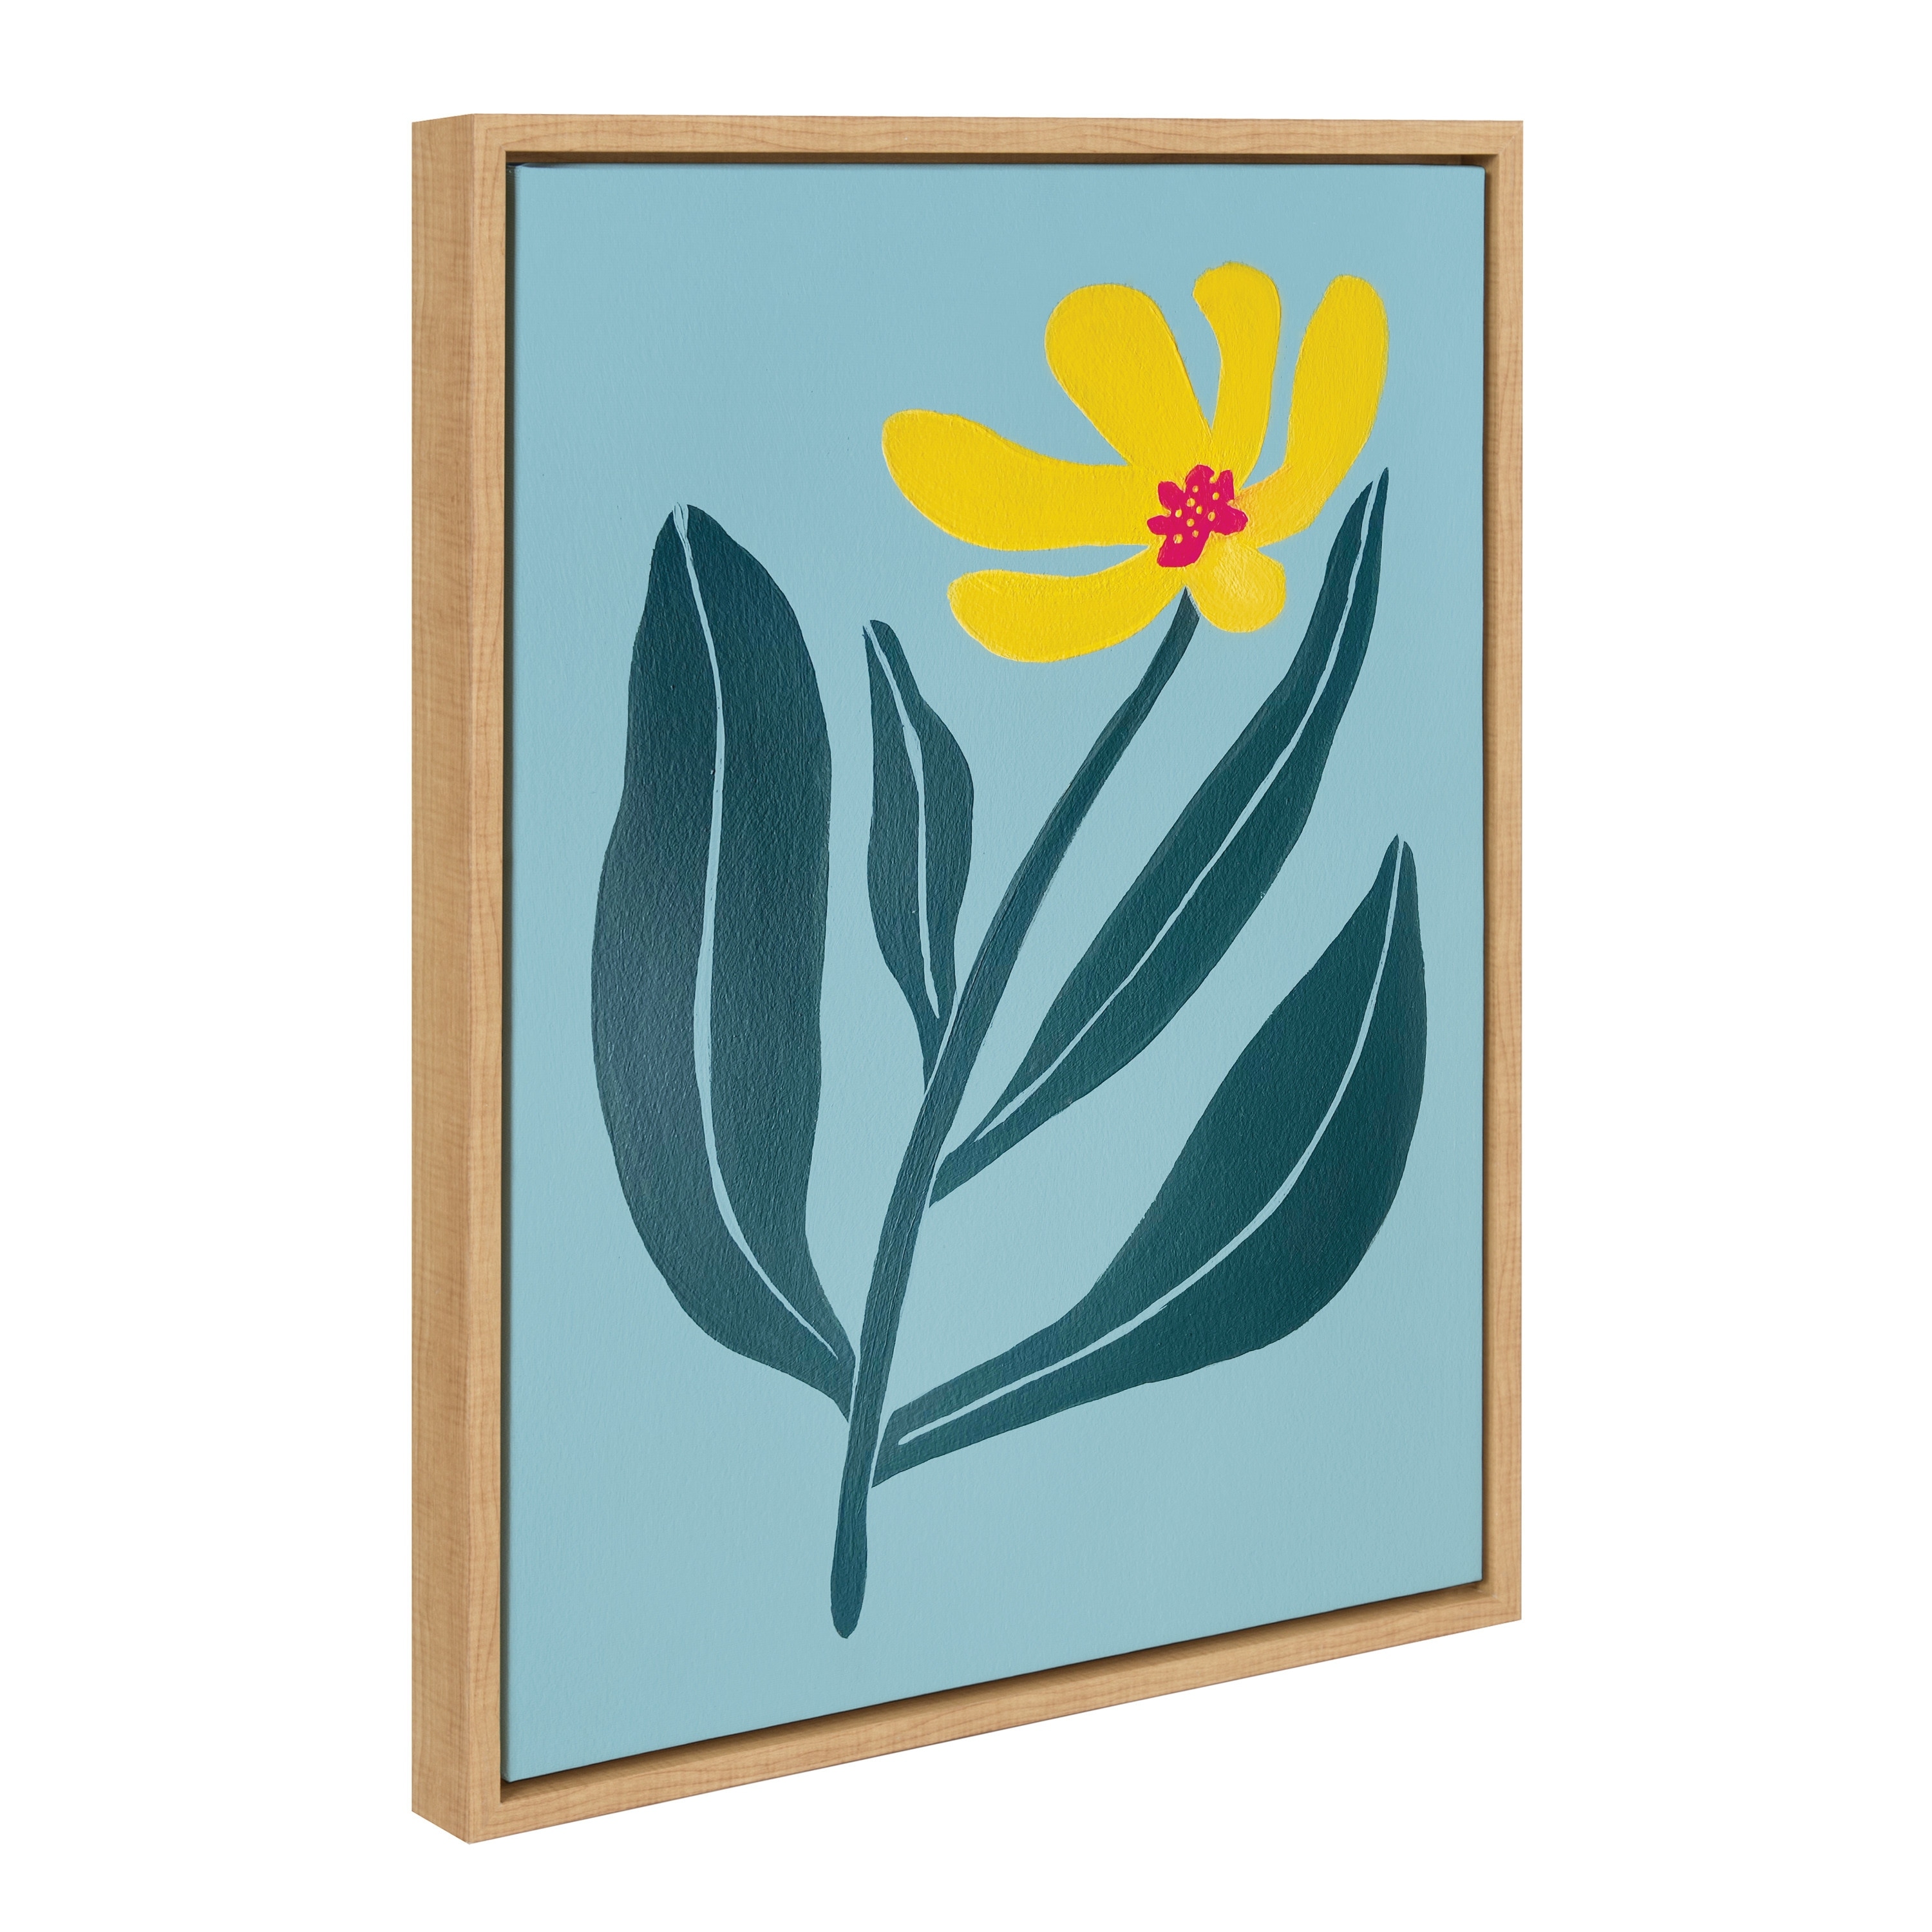 Kate and Laurel Sylvie Yellow Flower Framed Canvas by Emma Daisy Bed Bath   Beyond 36644416